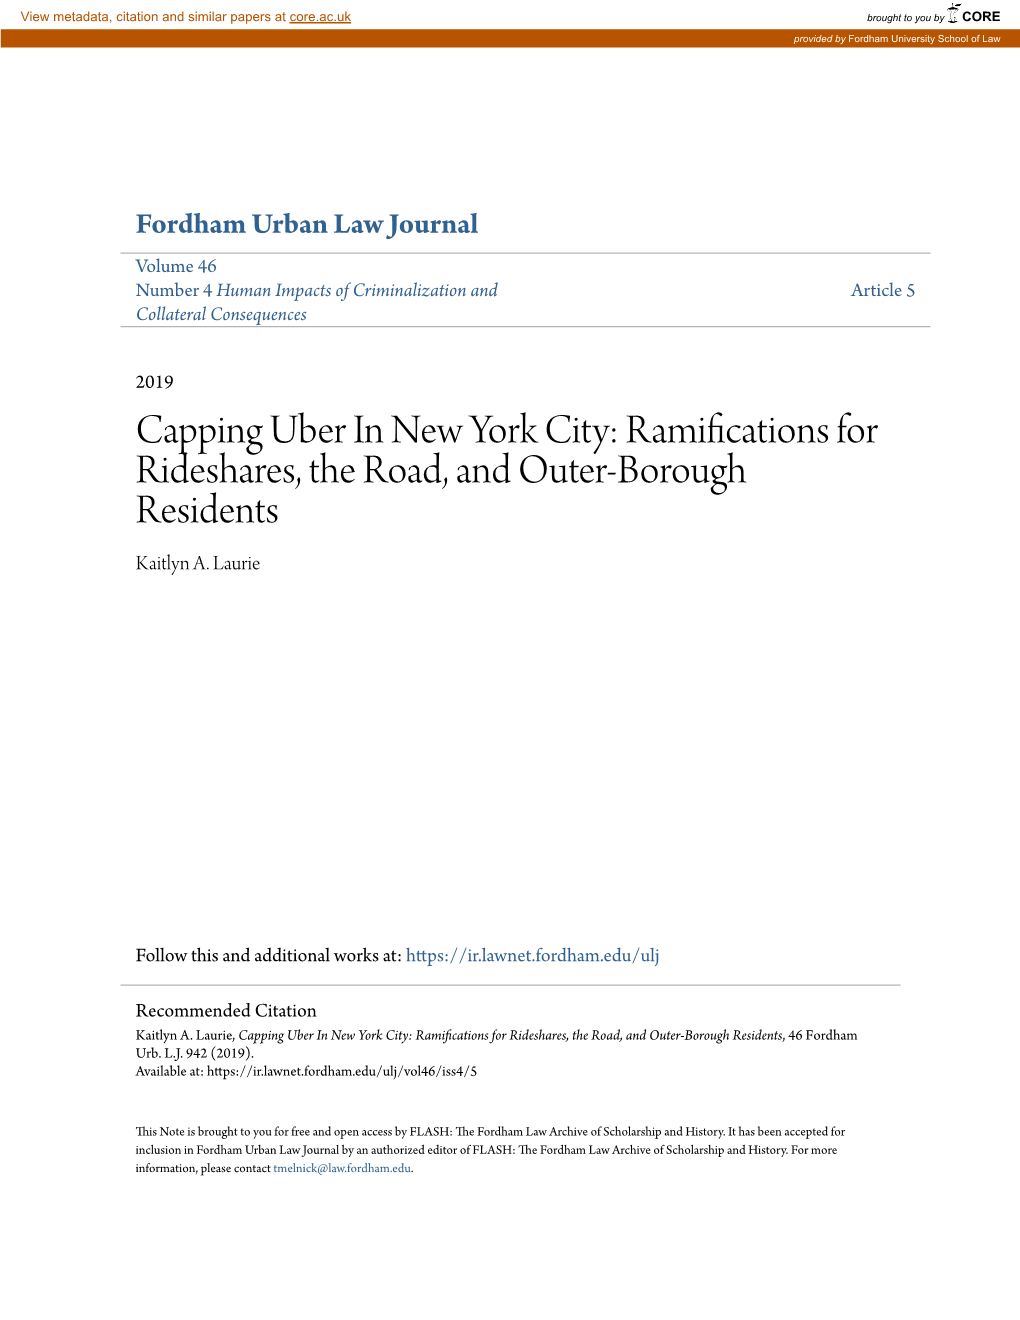 Capping Uber in New York City: Ramifications for Rideshares, the Road, and Outer-Borough Residents Kaitlyn A